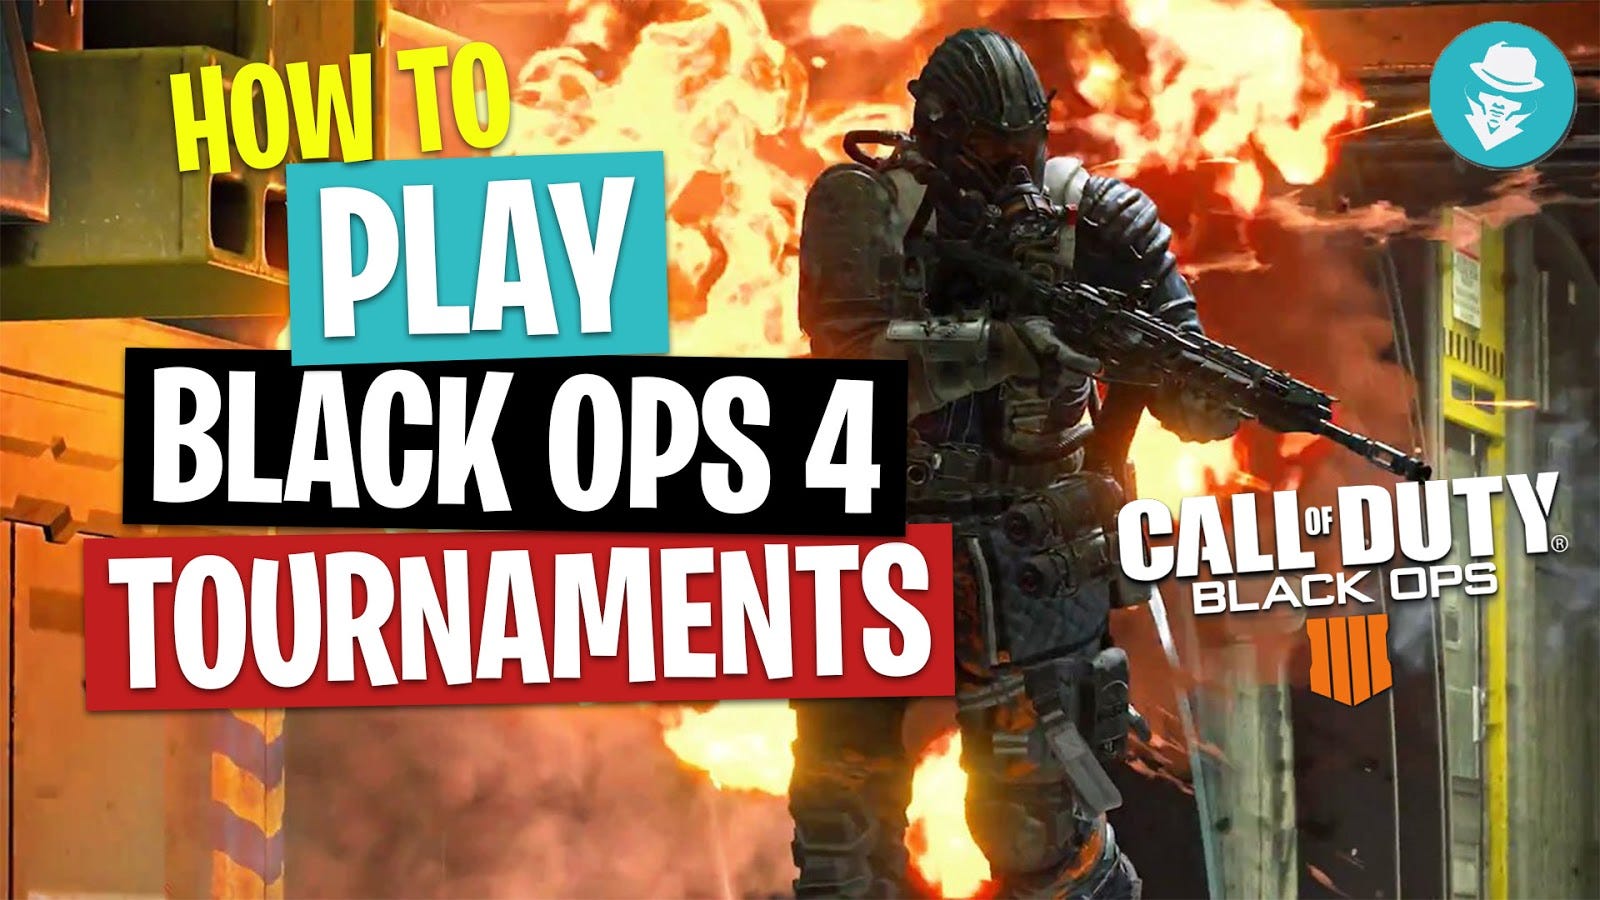 How To Play Call Of Duty: Black Ops 4 Tournaments For Money ... - 